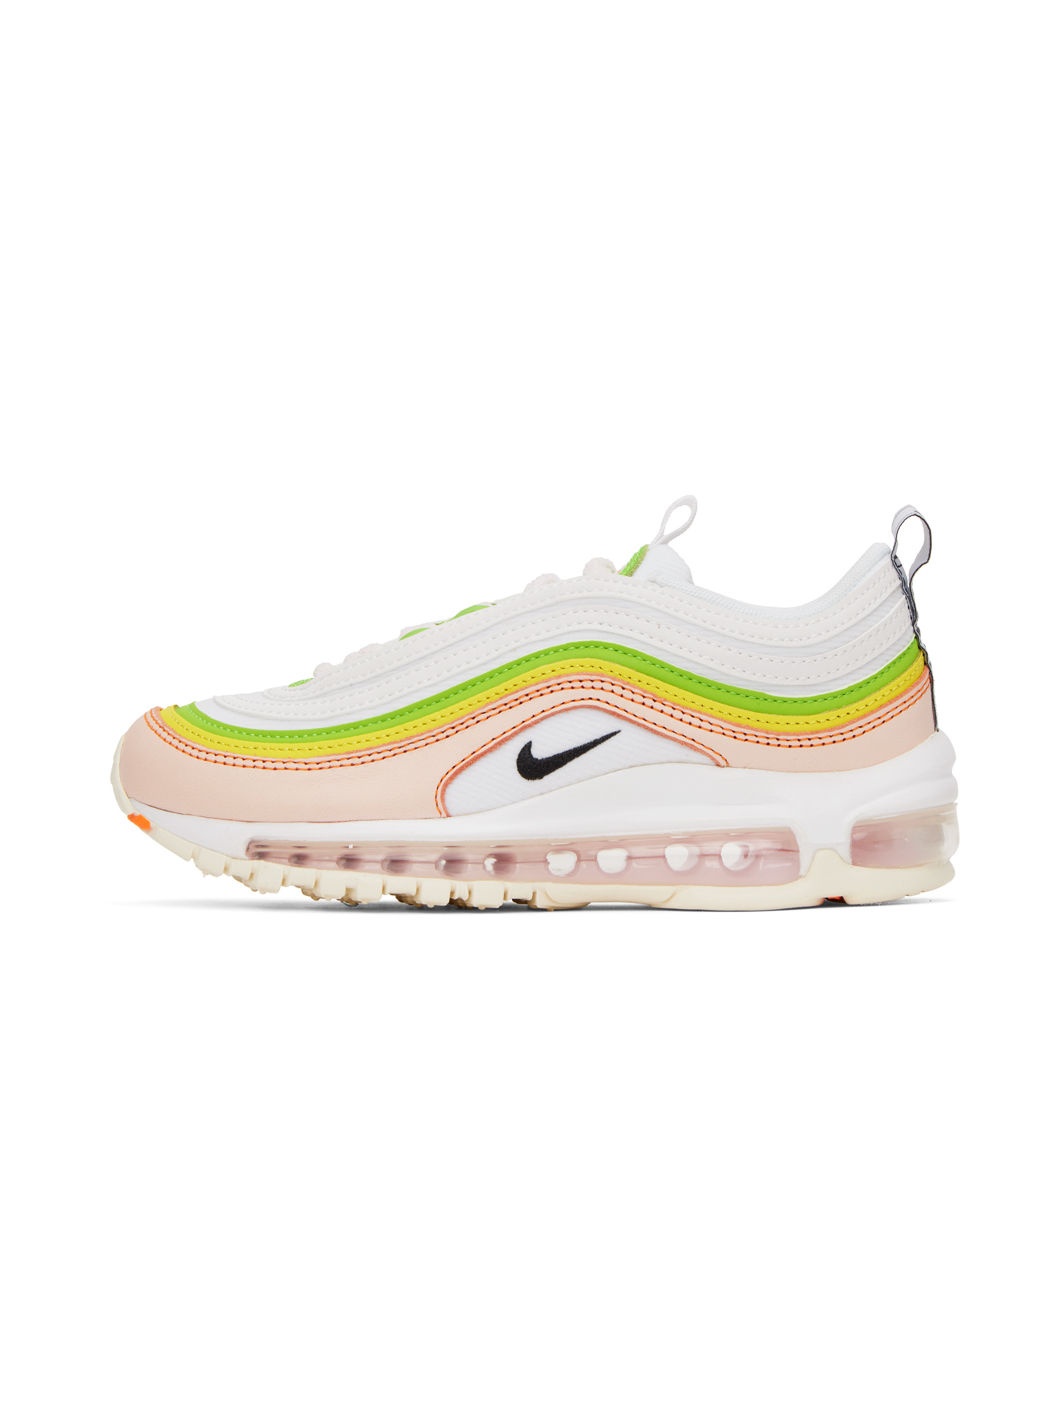 White & Pink Air Max 97 Sneakers - 3